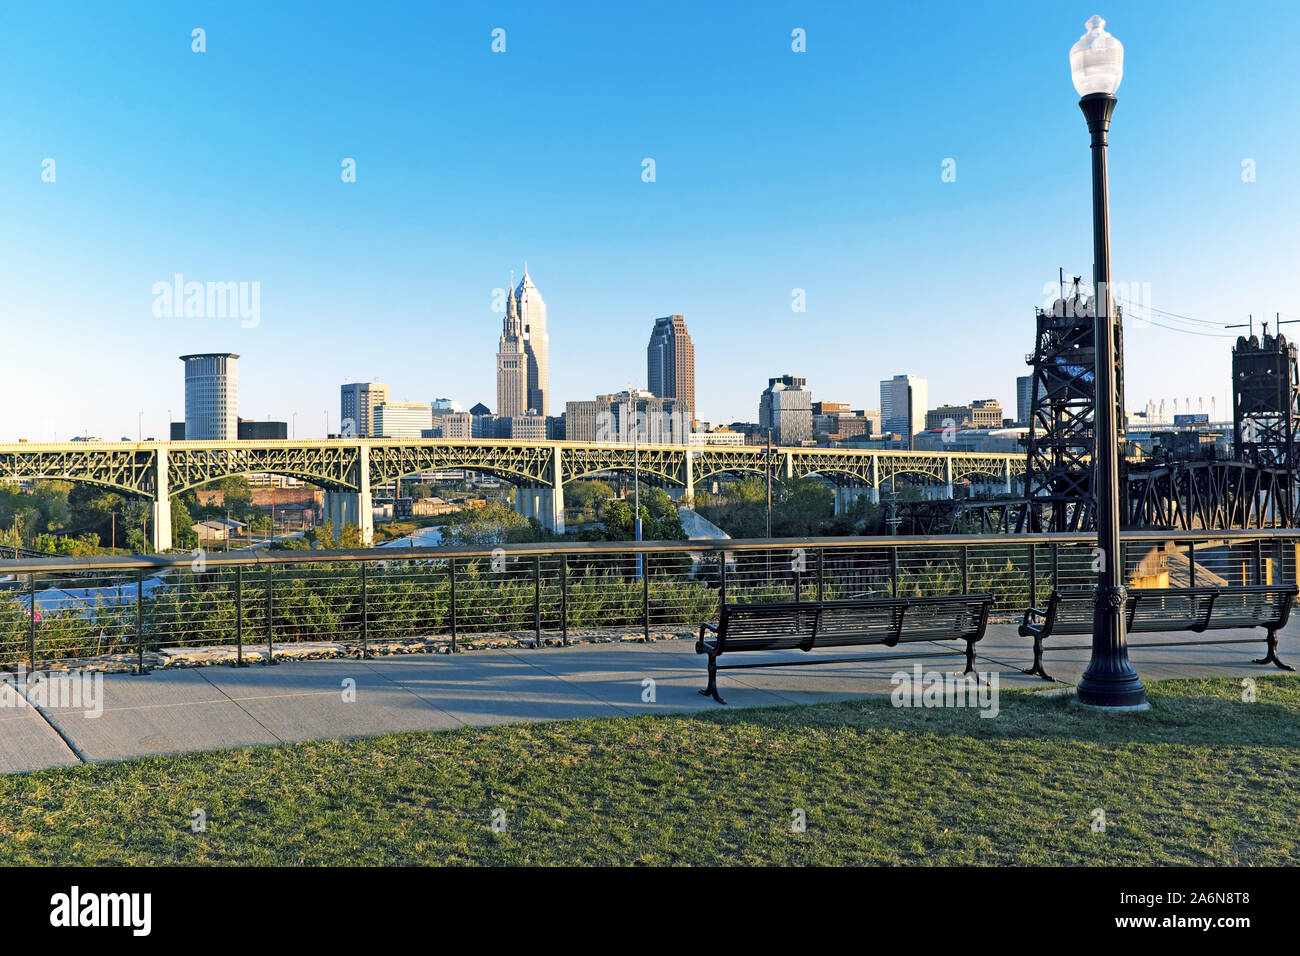 The Cleveland skyline at dusk as viewed from a public park area in the Tremont Ohio City neighborhoods of Cleveland, Ohio, USA. Stock Photo